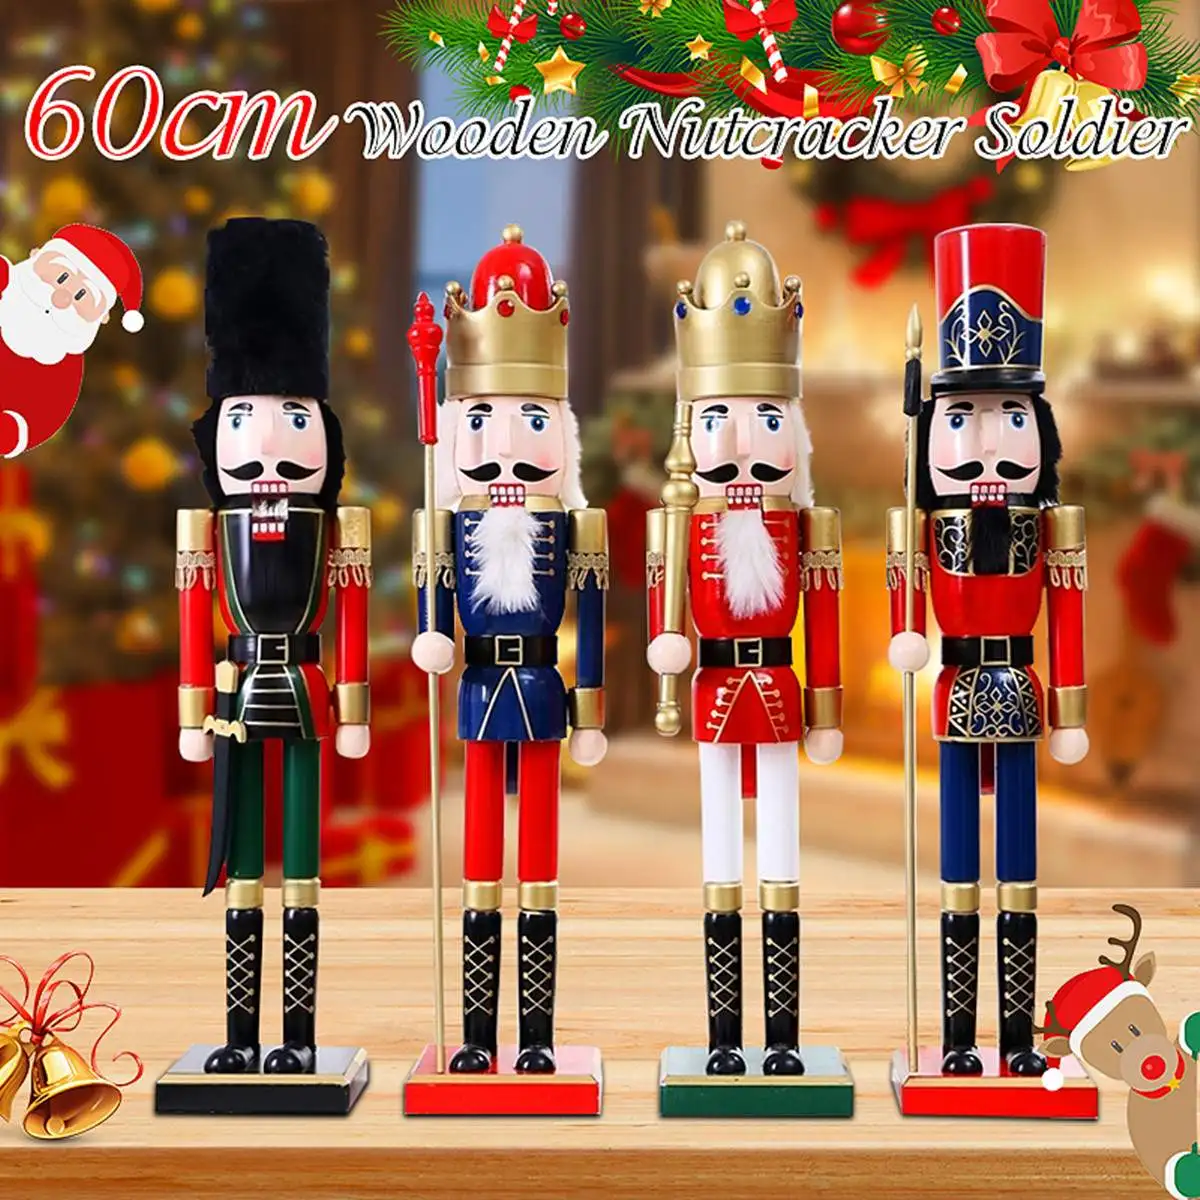 

Wooden humanoid welded Nutcracker 60cm, Christmas decorations, walnut puppet crafts, gifts toys